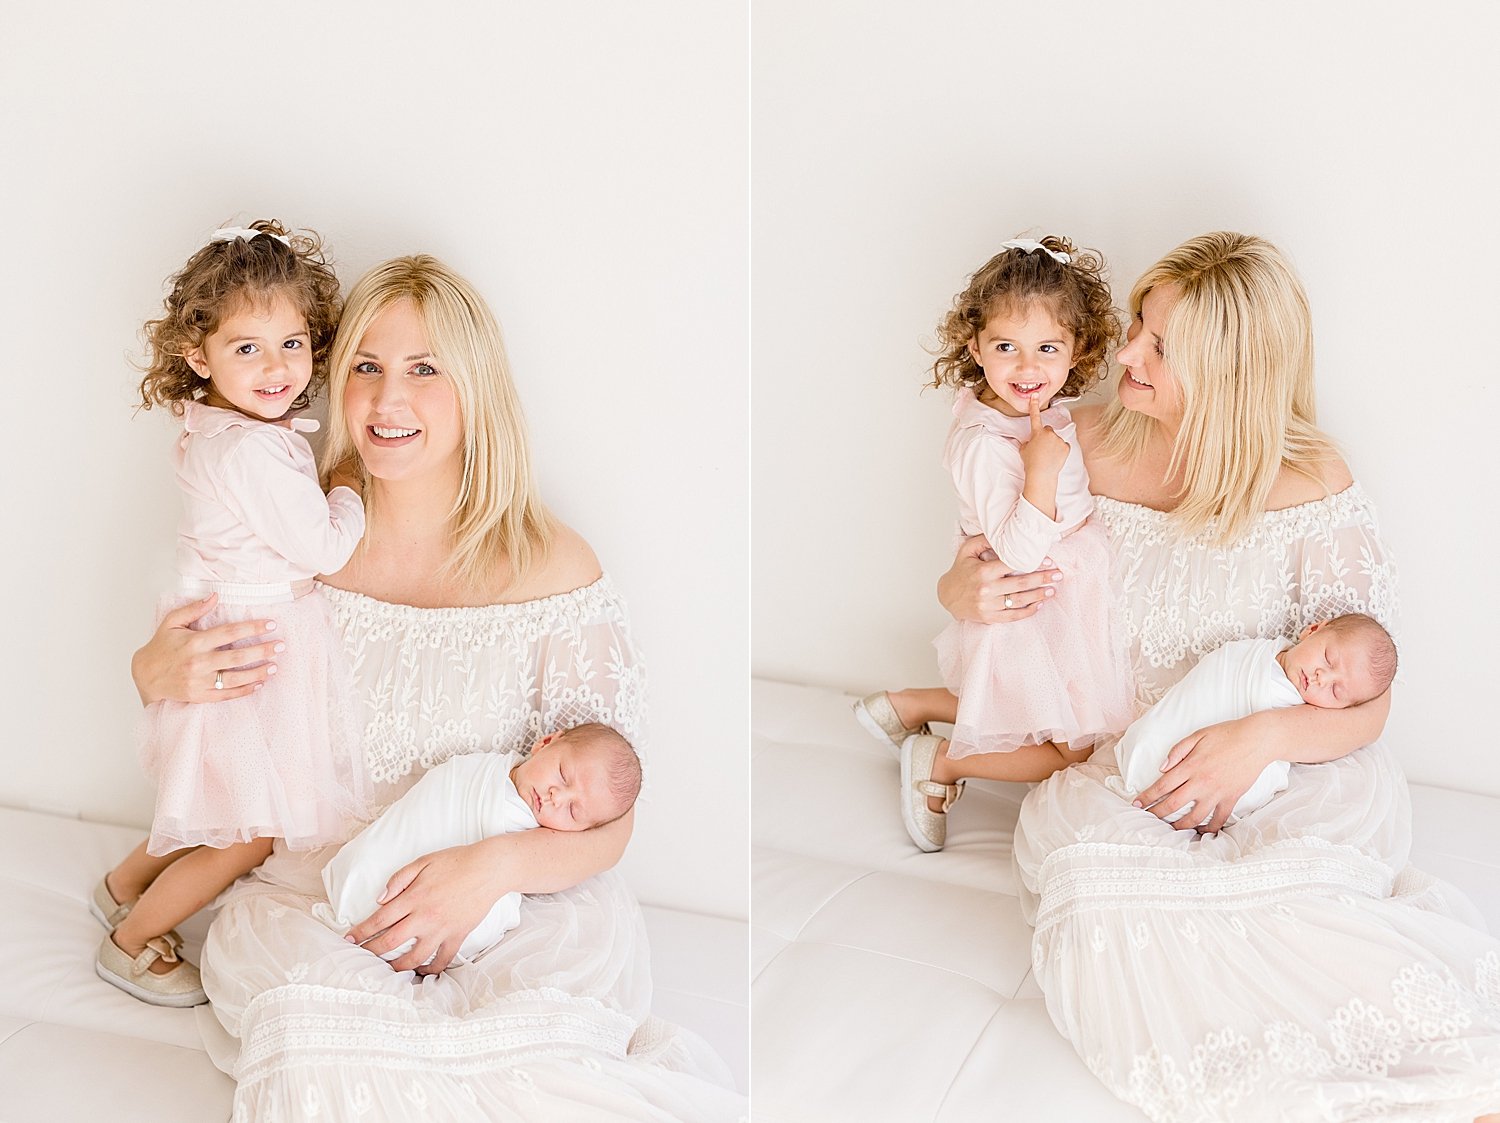 Mom with her daughter and newborn son | Ambre Williams Photography